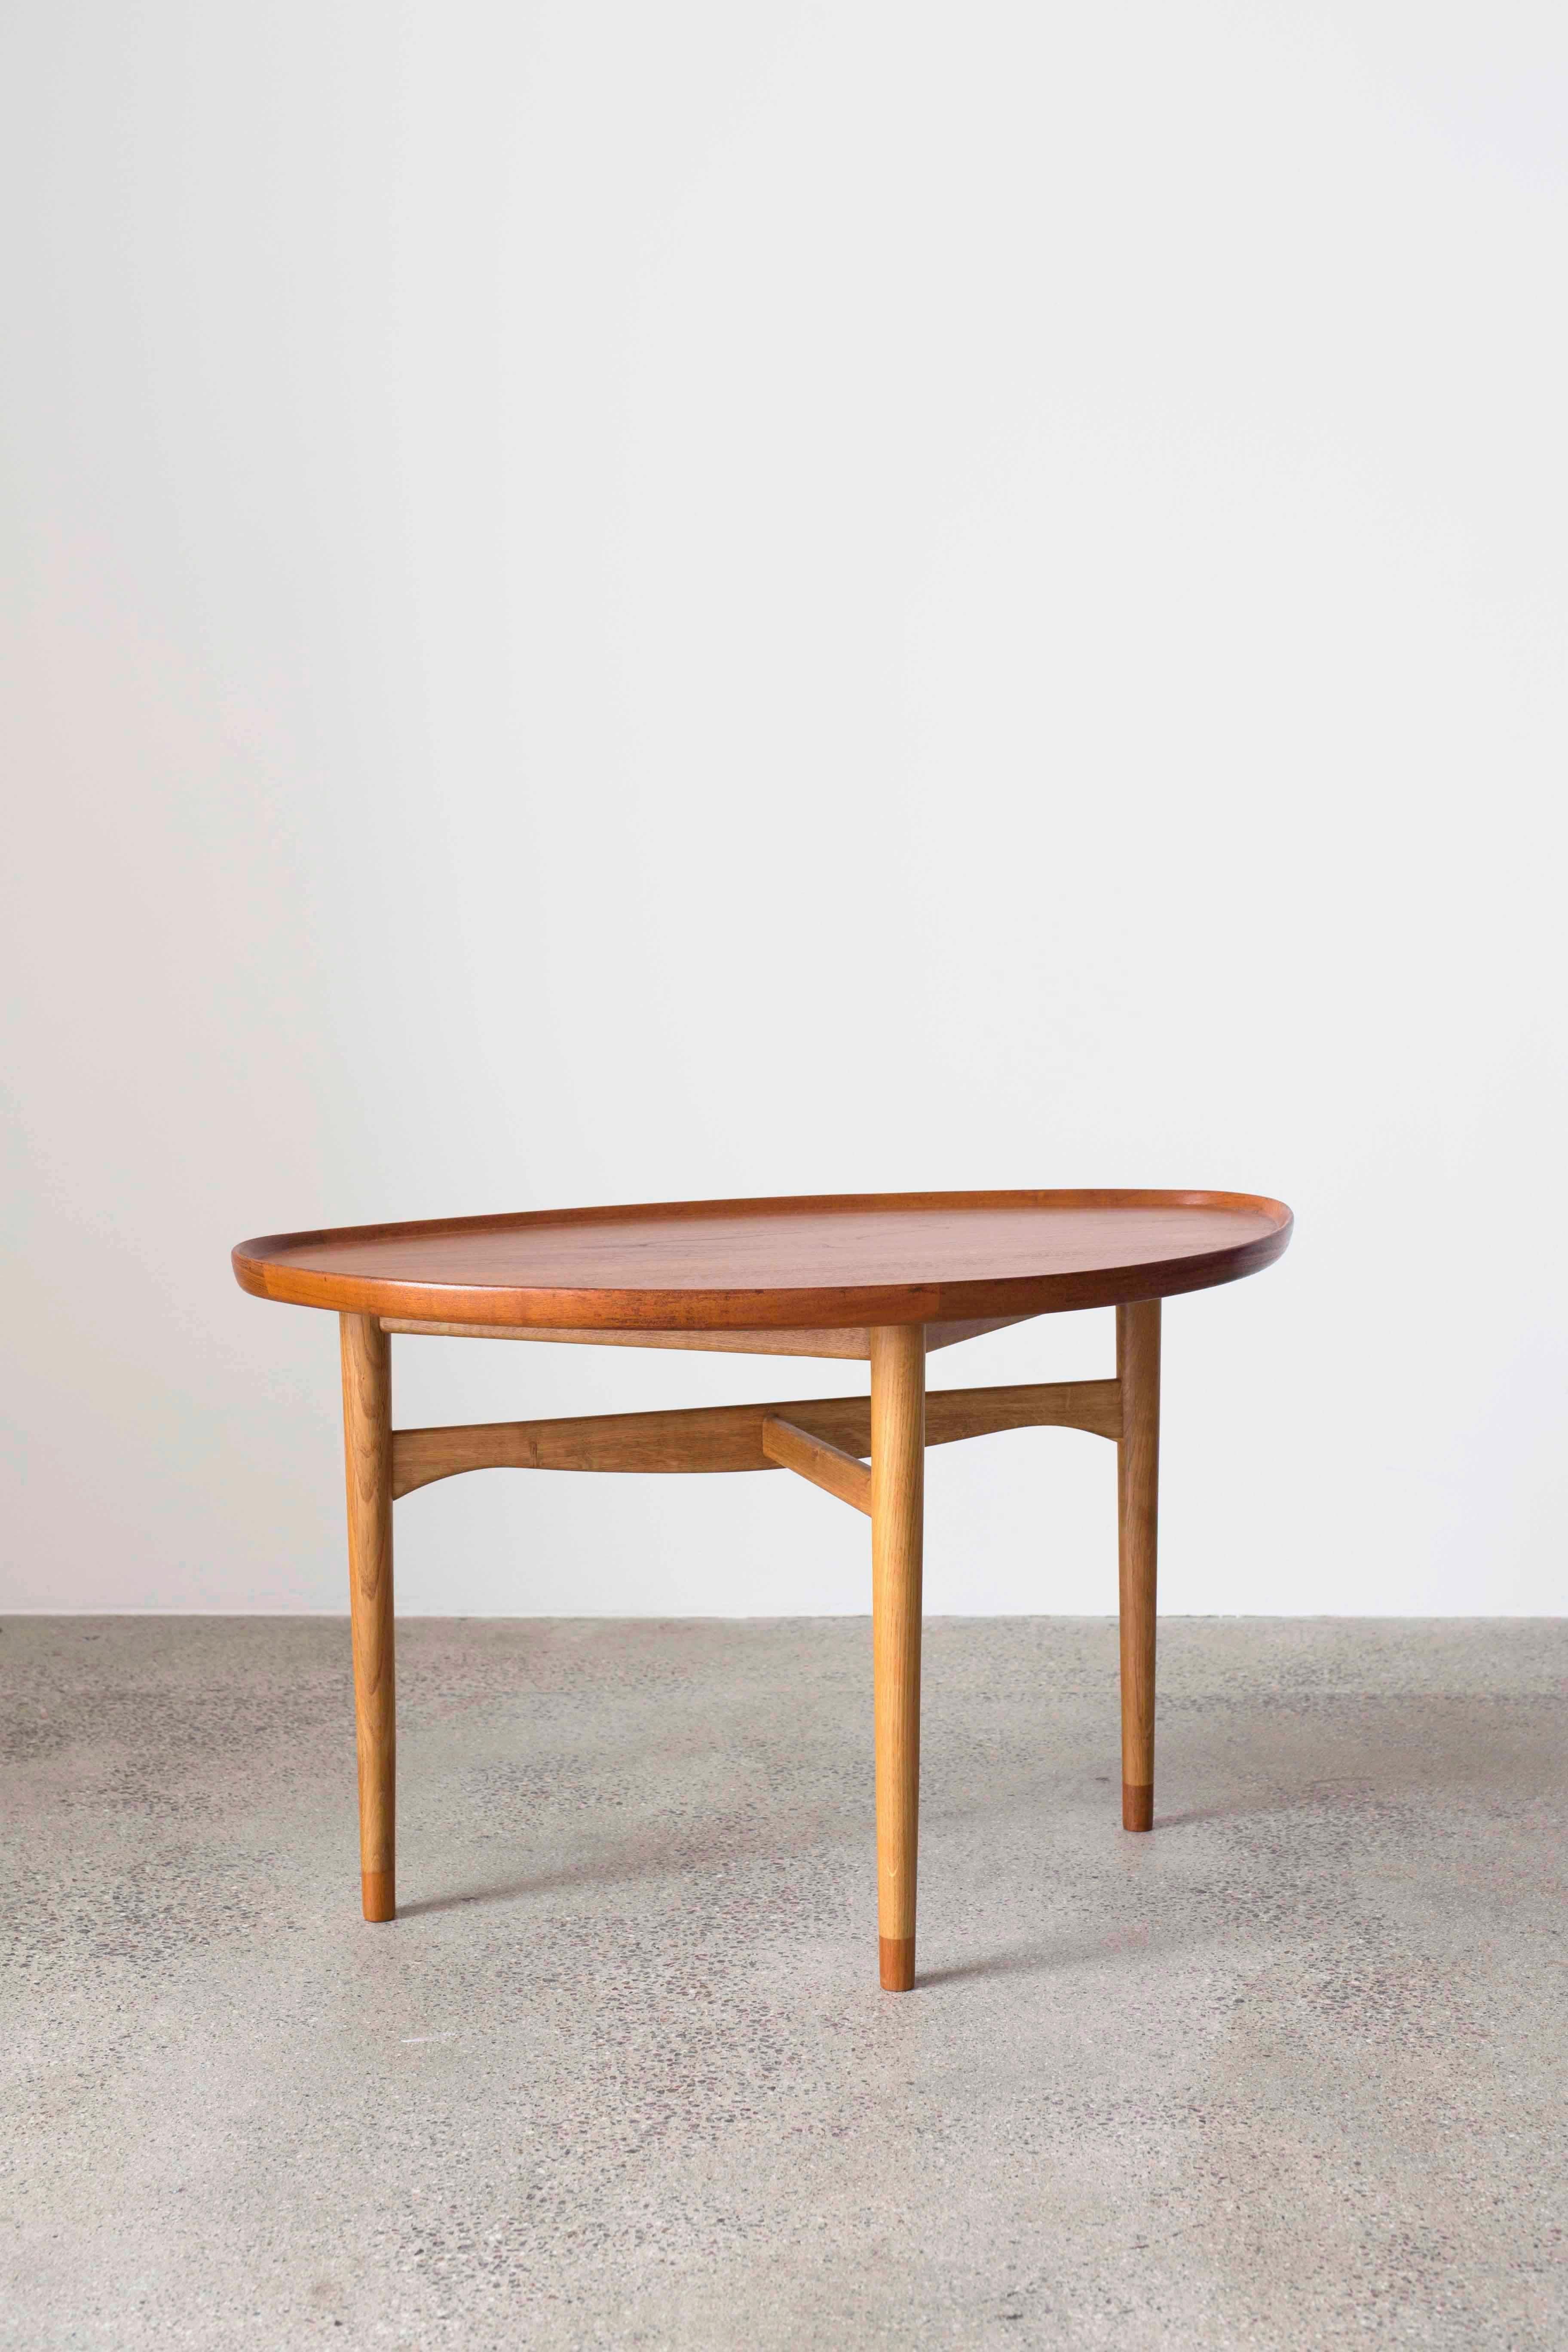 Finn Juhl coffee table. Tabletop with raised edges and leg ends of teak, frame of oak.

Designed by Finn Juhl 1948 and executed by Bovirke, Denmark.

Fine condition.